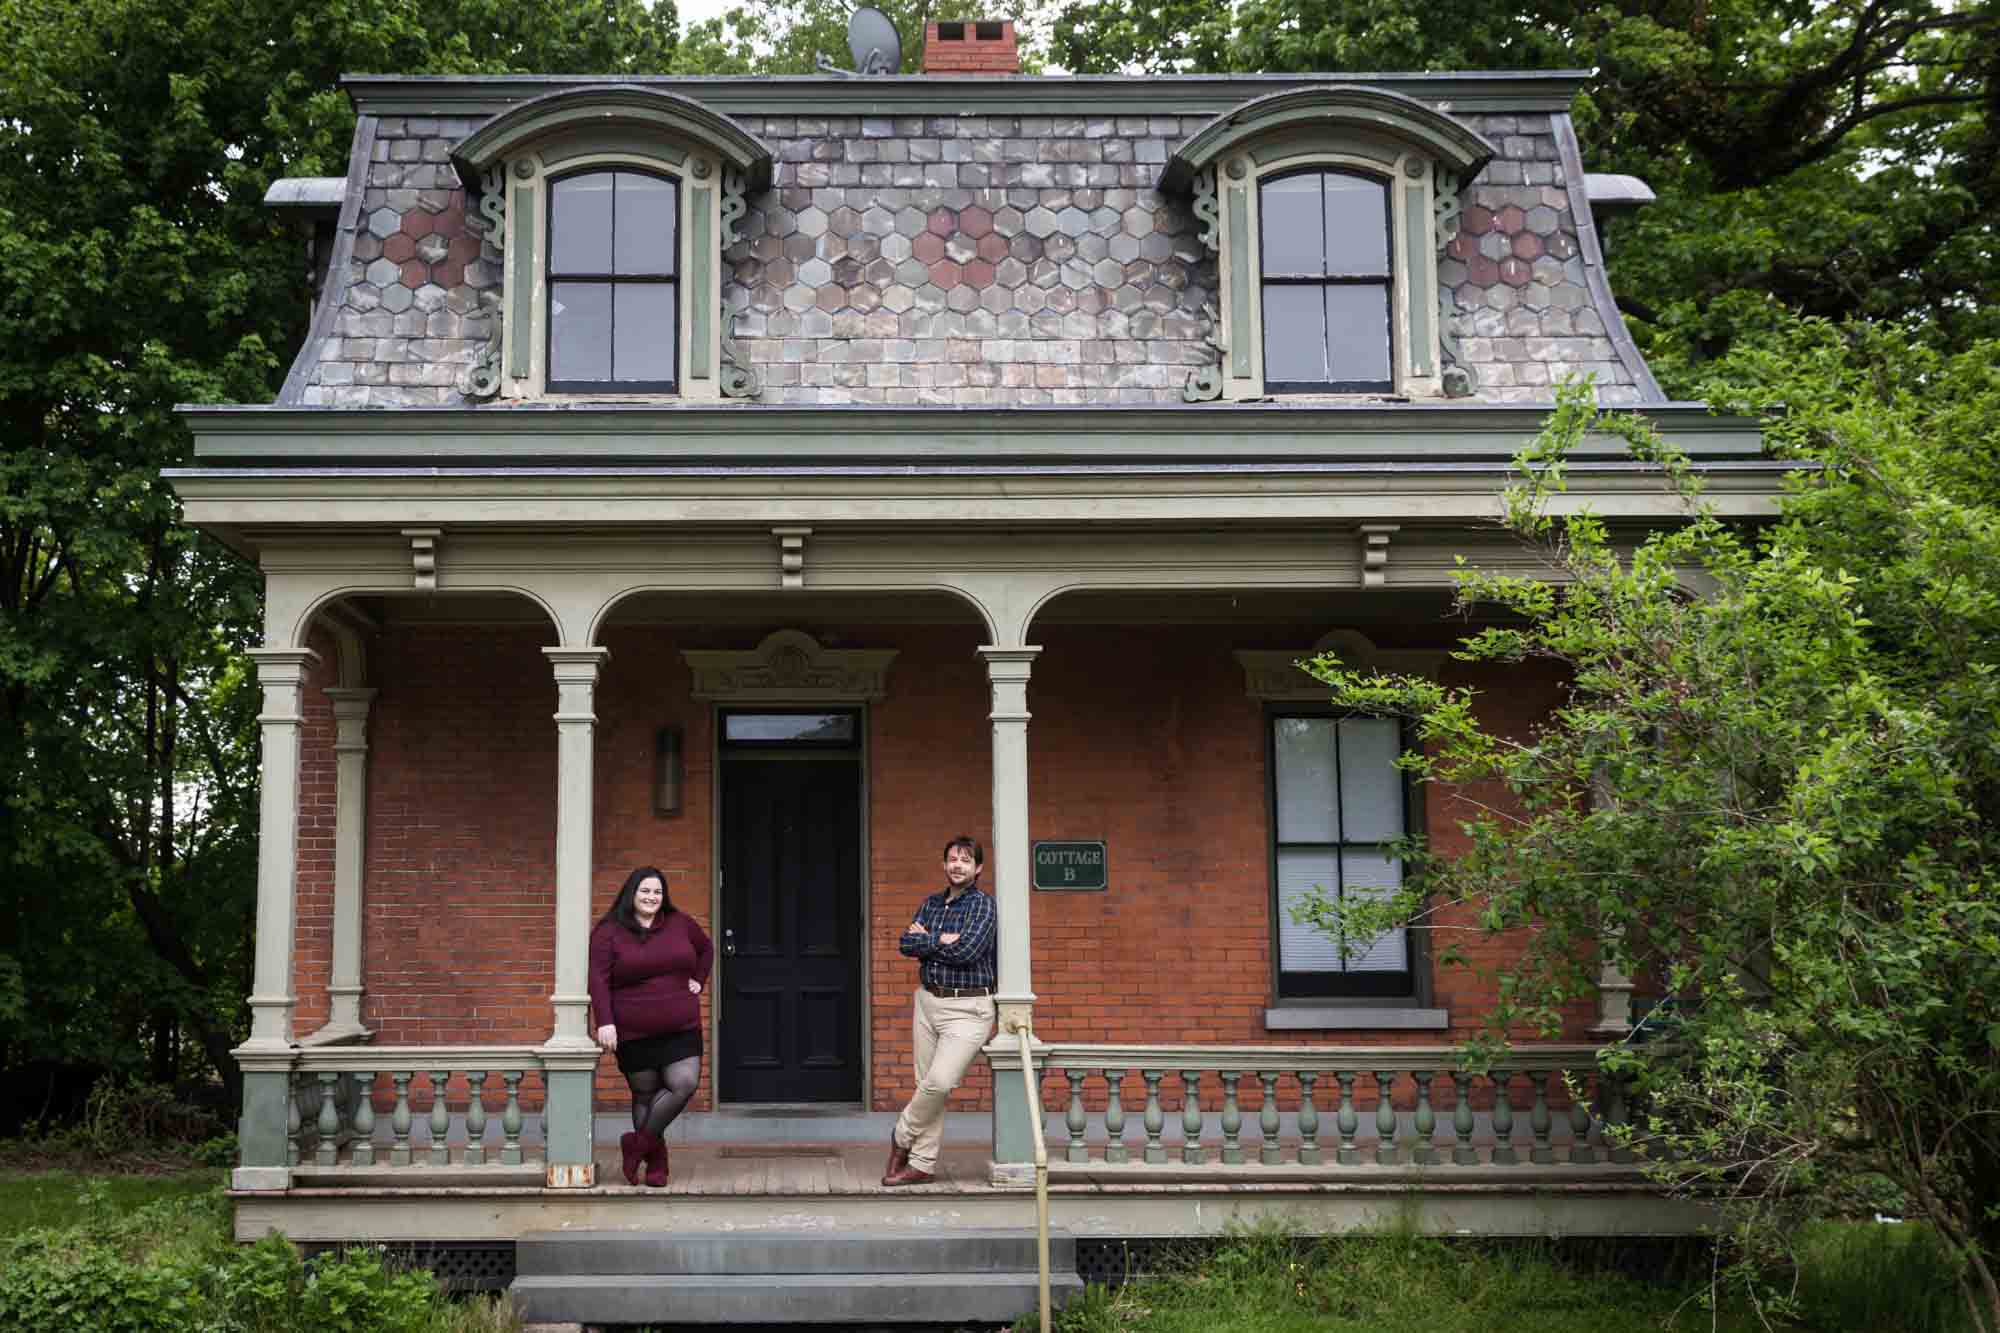 Snug Harbor engagement photos of couple standing on steps of Cottage Row house